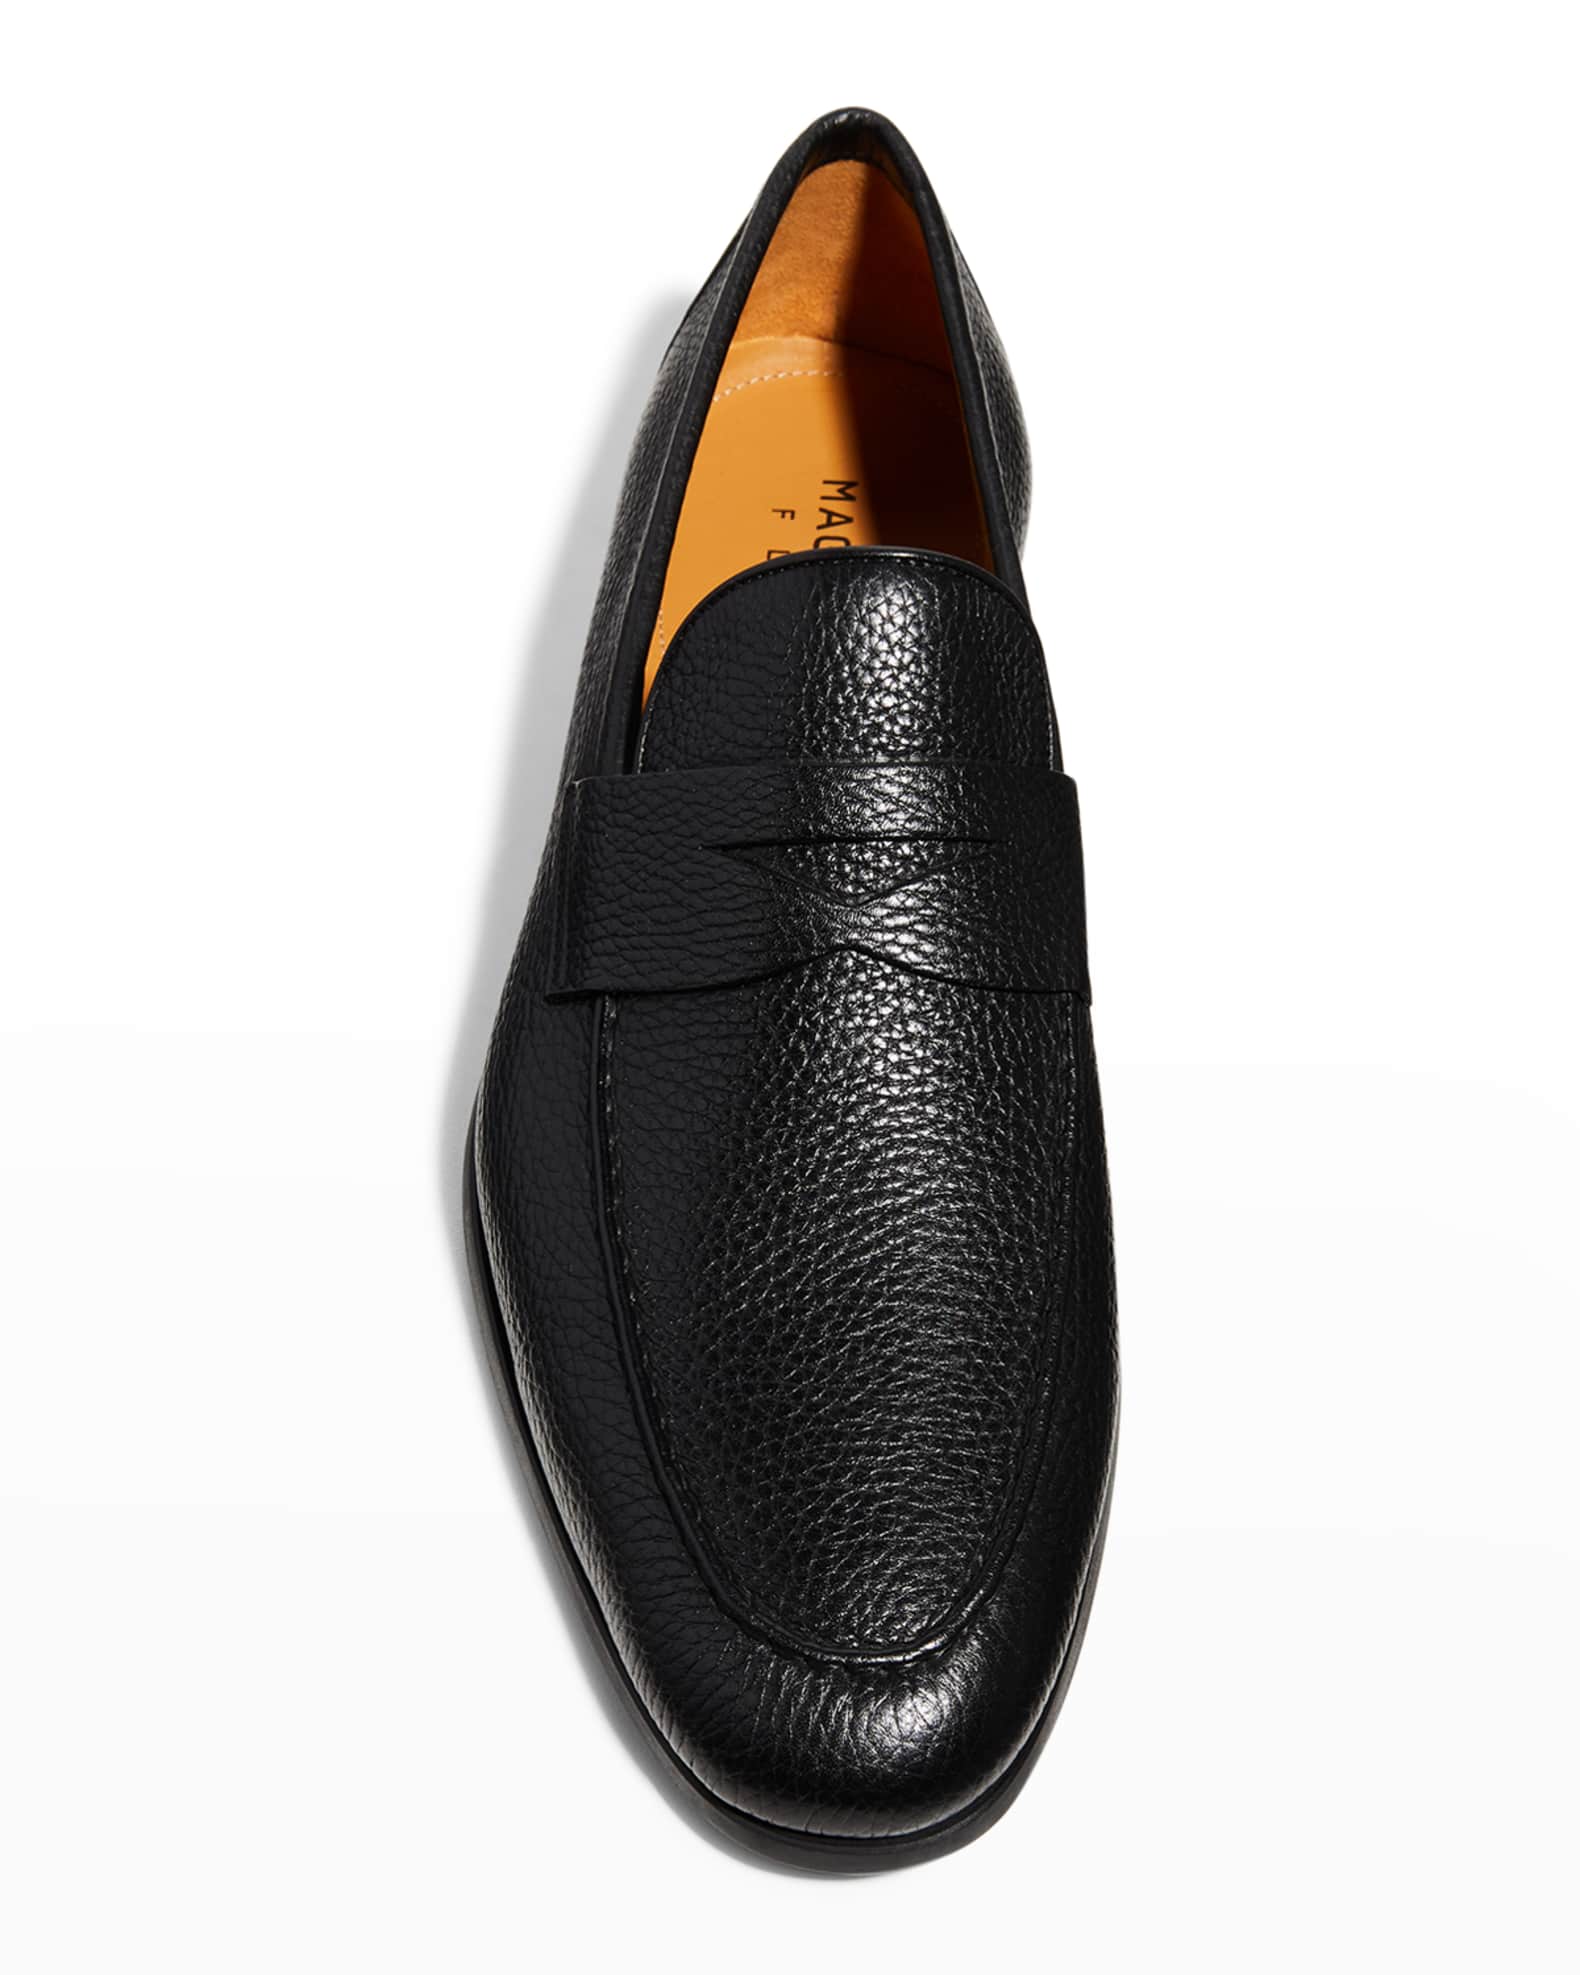 Magnanni Men's Diezman II Leather Penny Loafers | Neiman Marcus